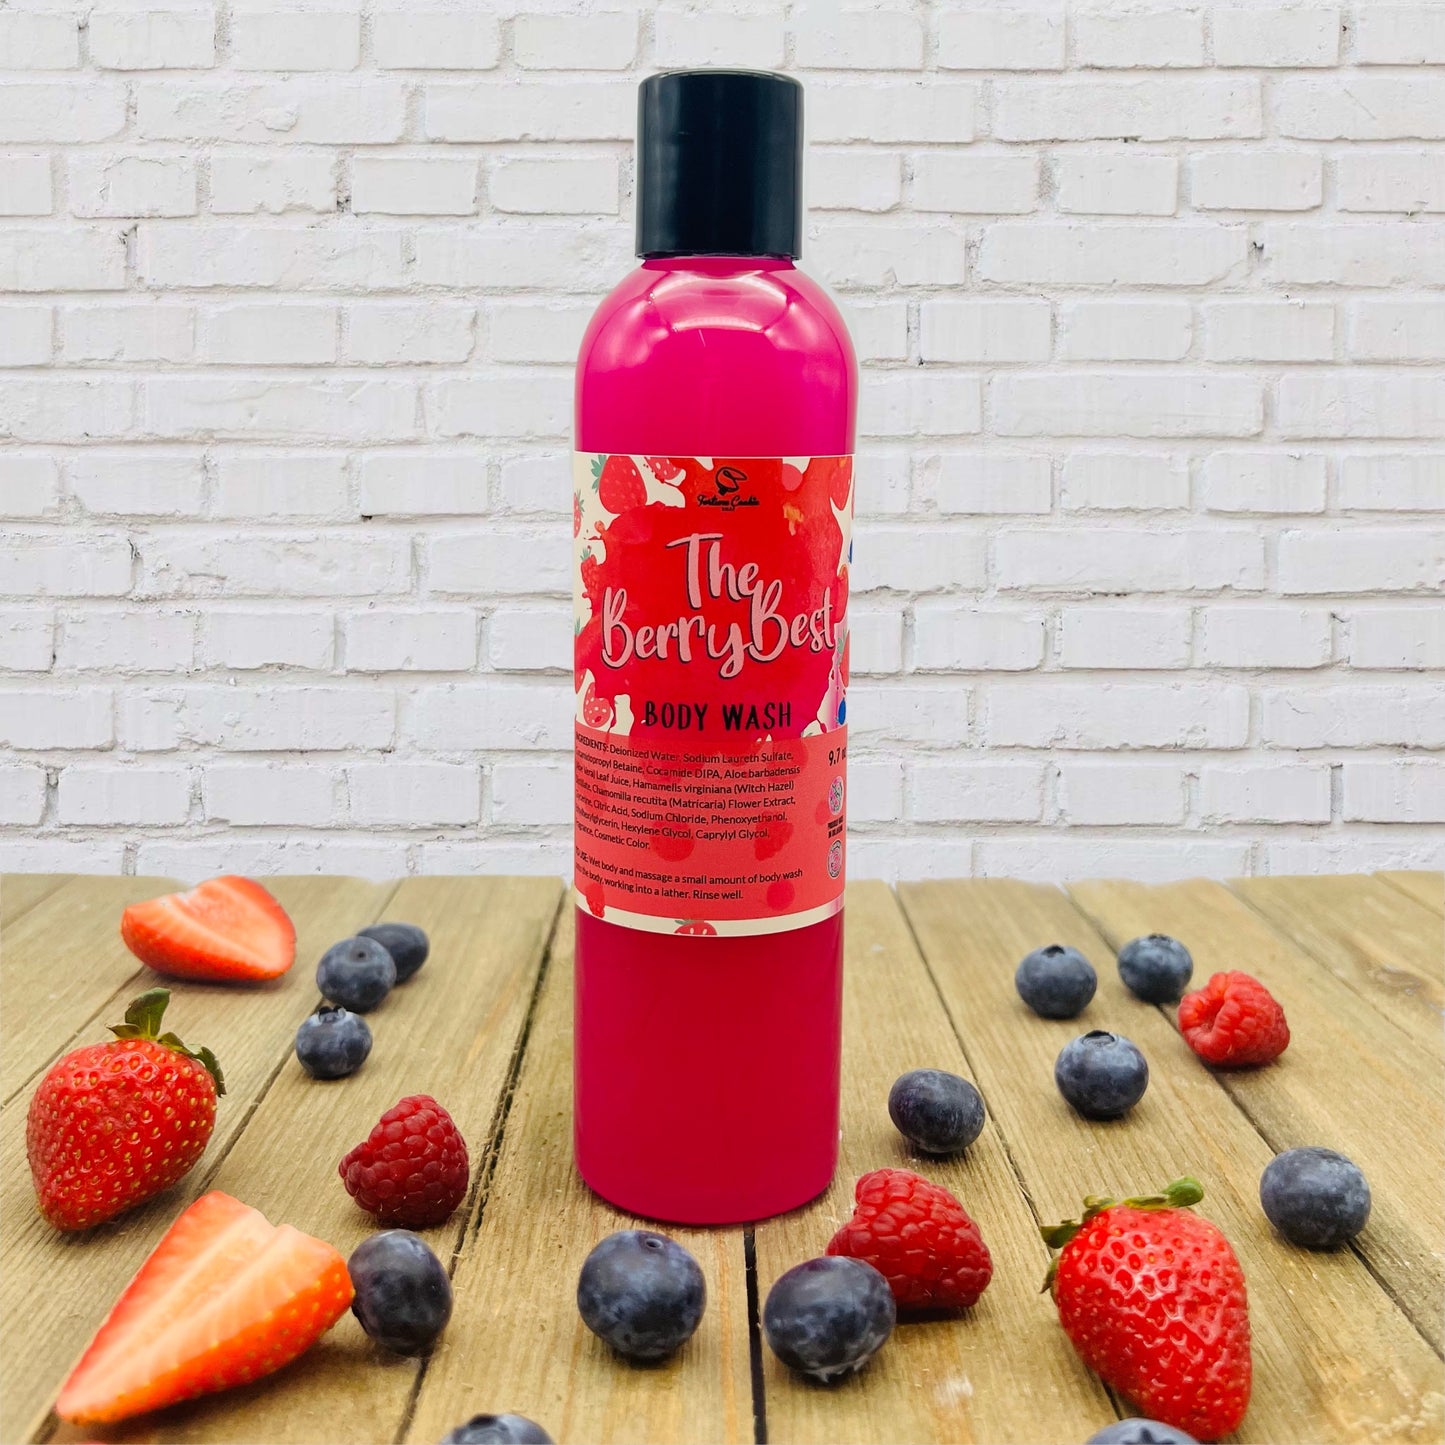 THE BERRY BEST Body Wash